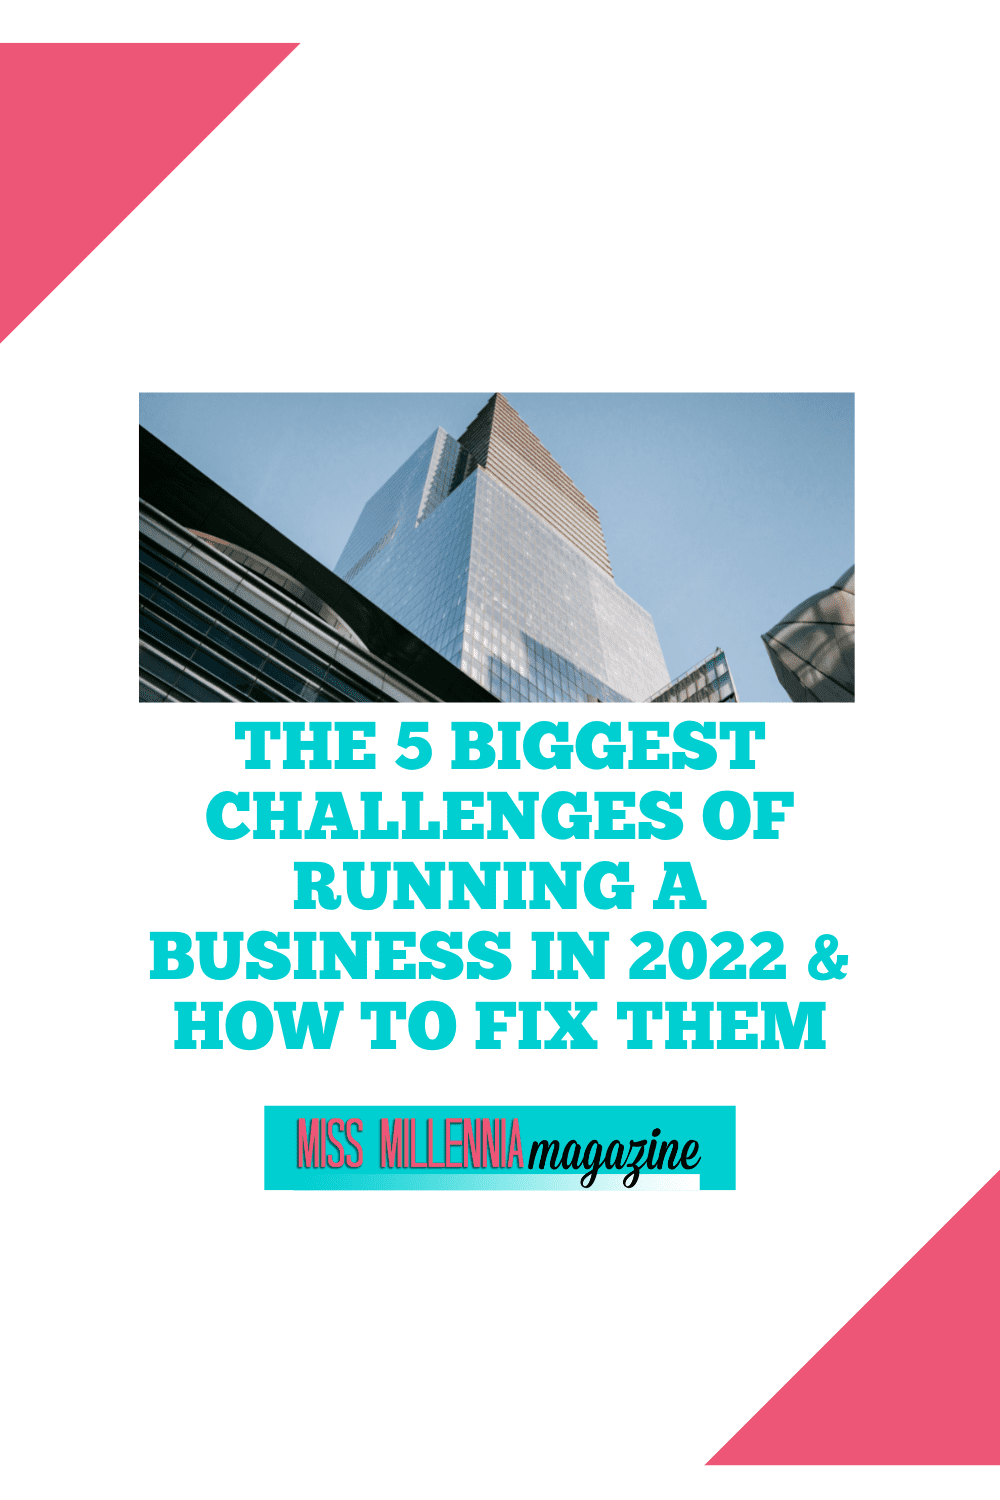 The 5 Biggest Challenges Of Running A Business In 2022 & How to Fix Them